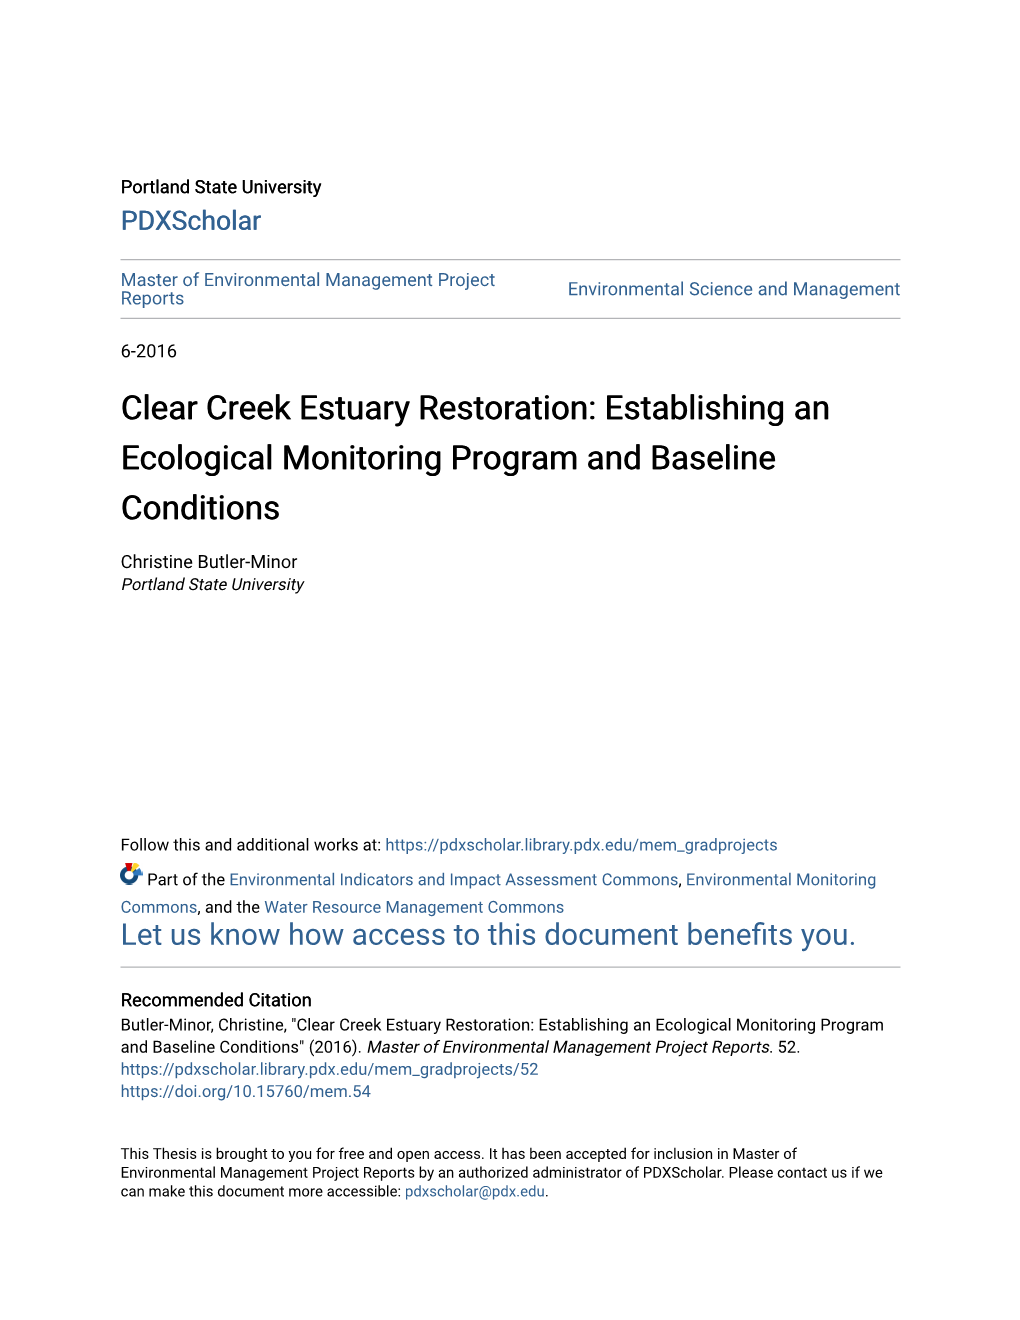 Clear Creek Estuary Restoration: Establishing an Ecological Monitoring Program and Baseline Conditions